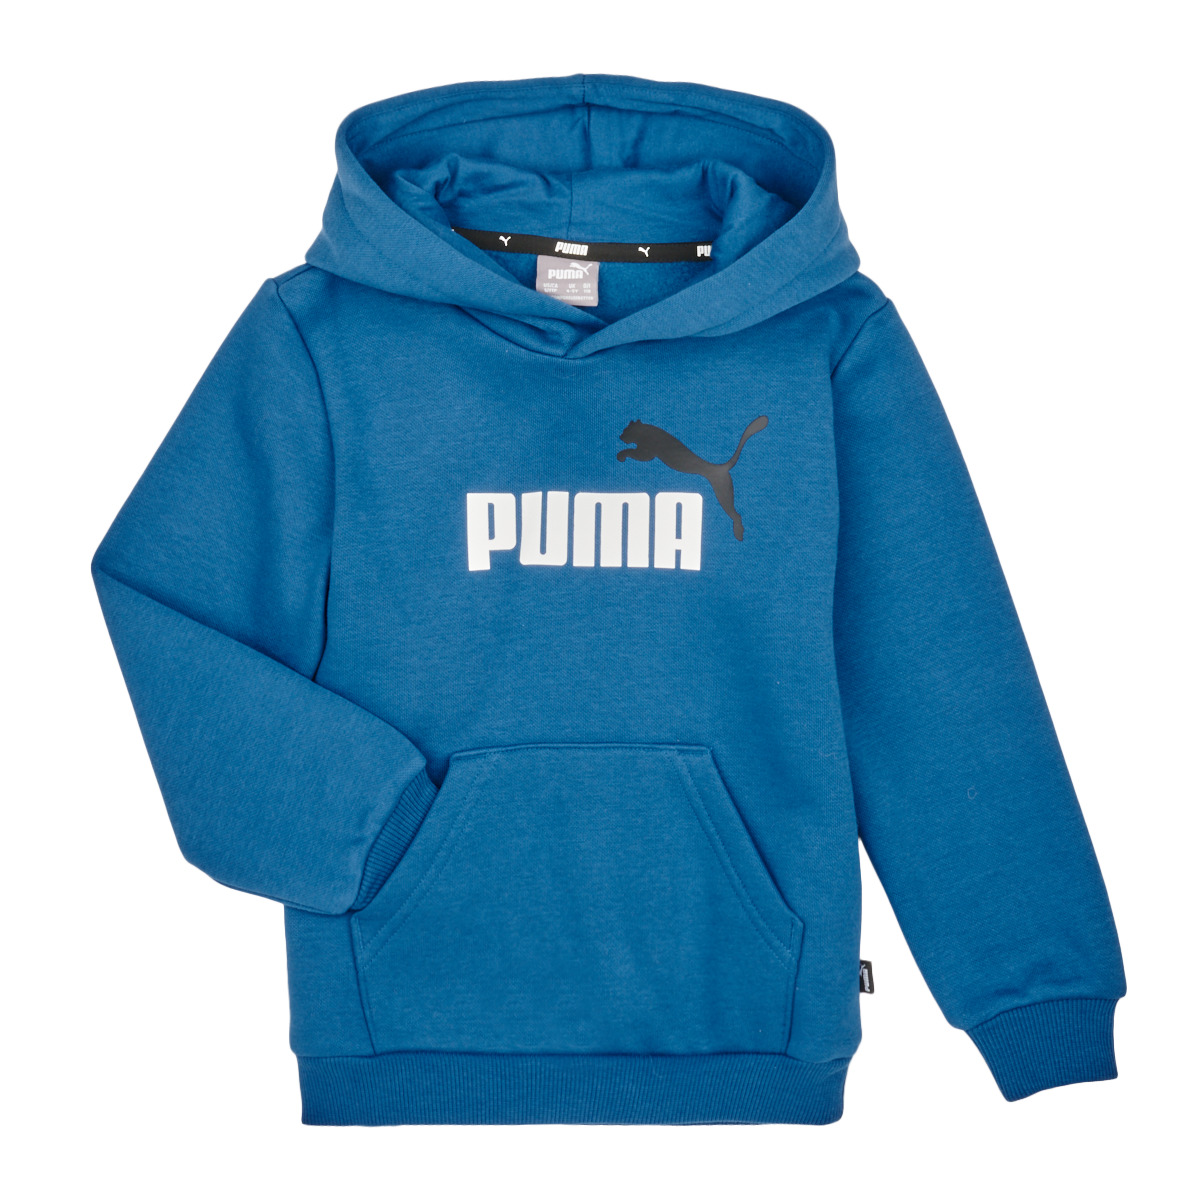 LOGO - Blue Clothing delivery ESS Puma BIG Fast HOODIE COL ! 26,40 | Spartoo sweaters € - Europe 2 Child